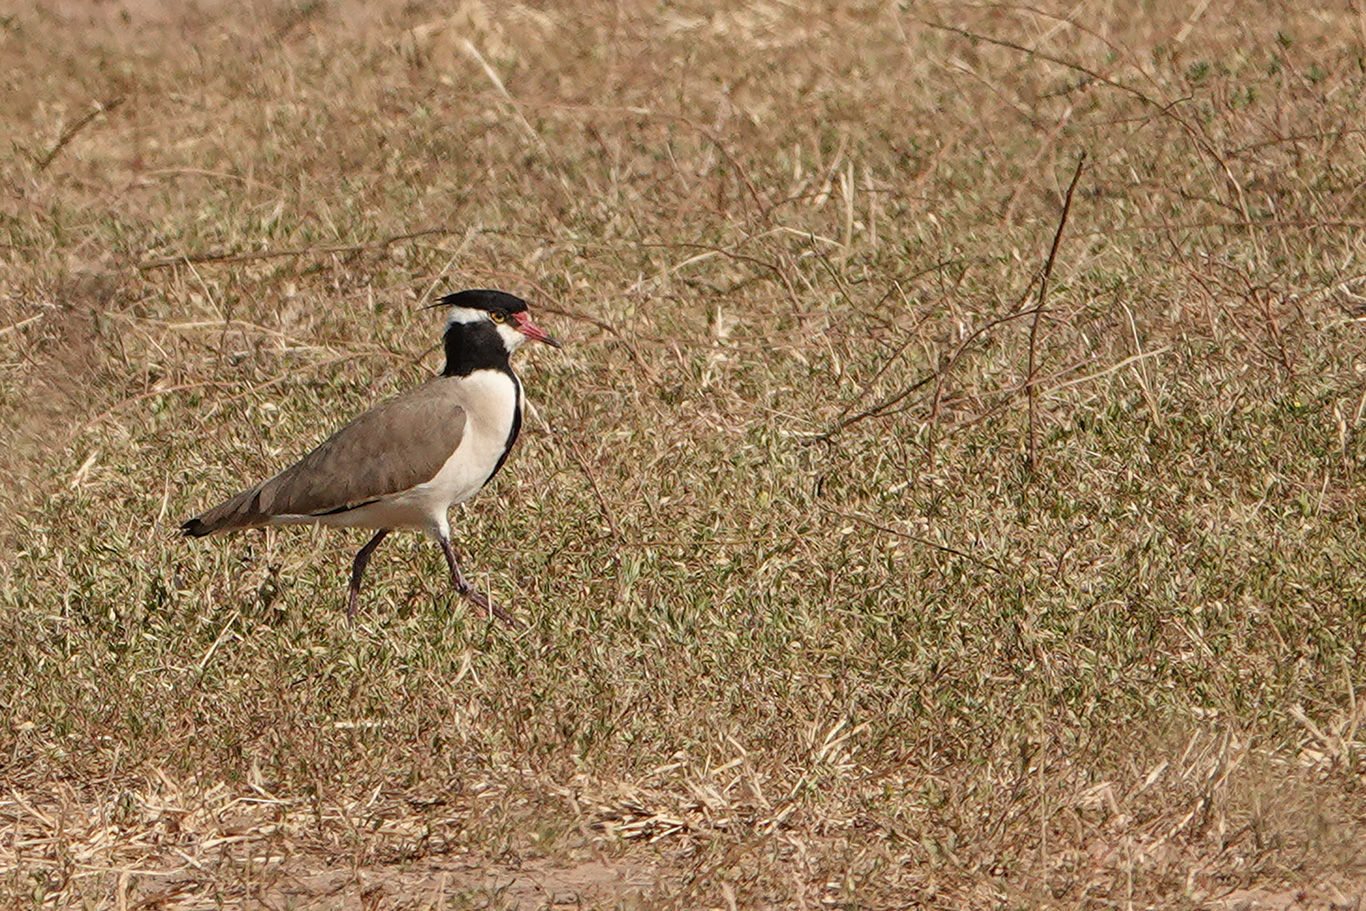 Black-headed Lapwing, South Bank Road, The Gambia.